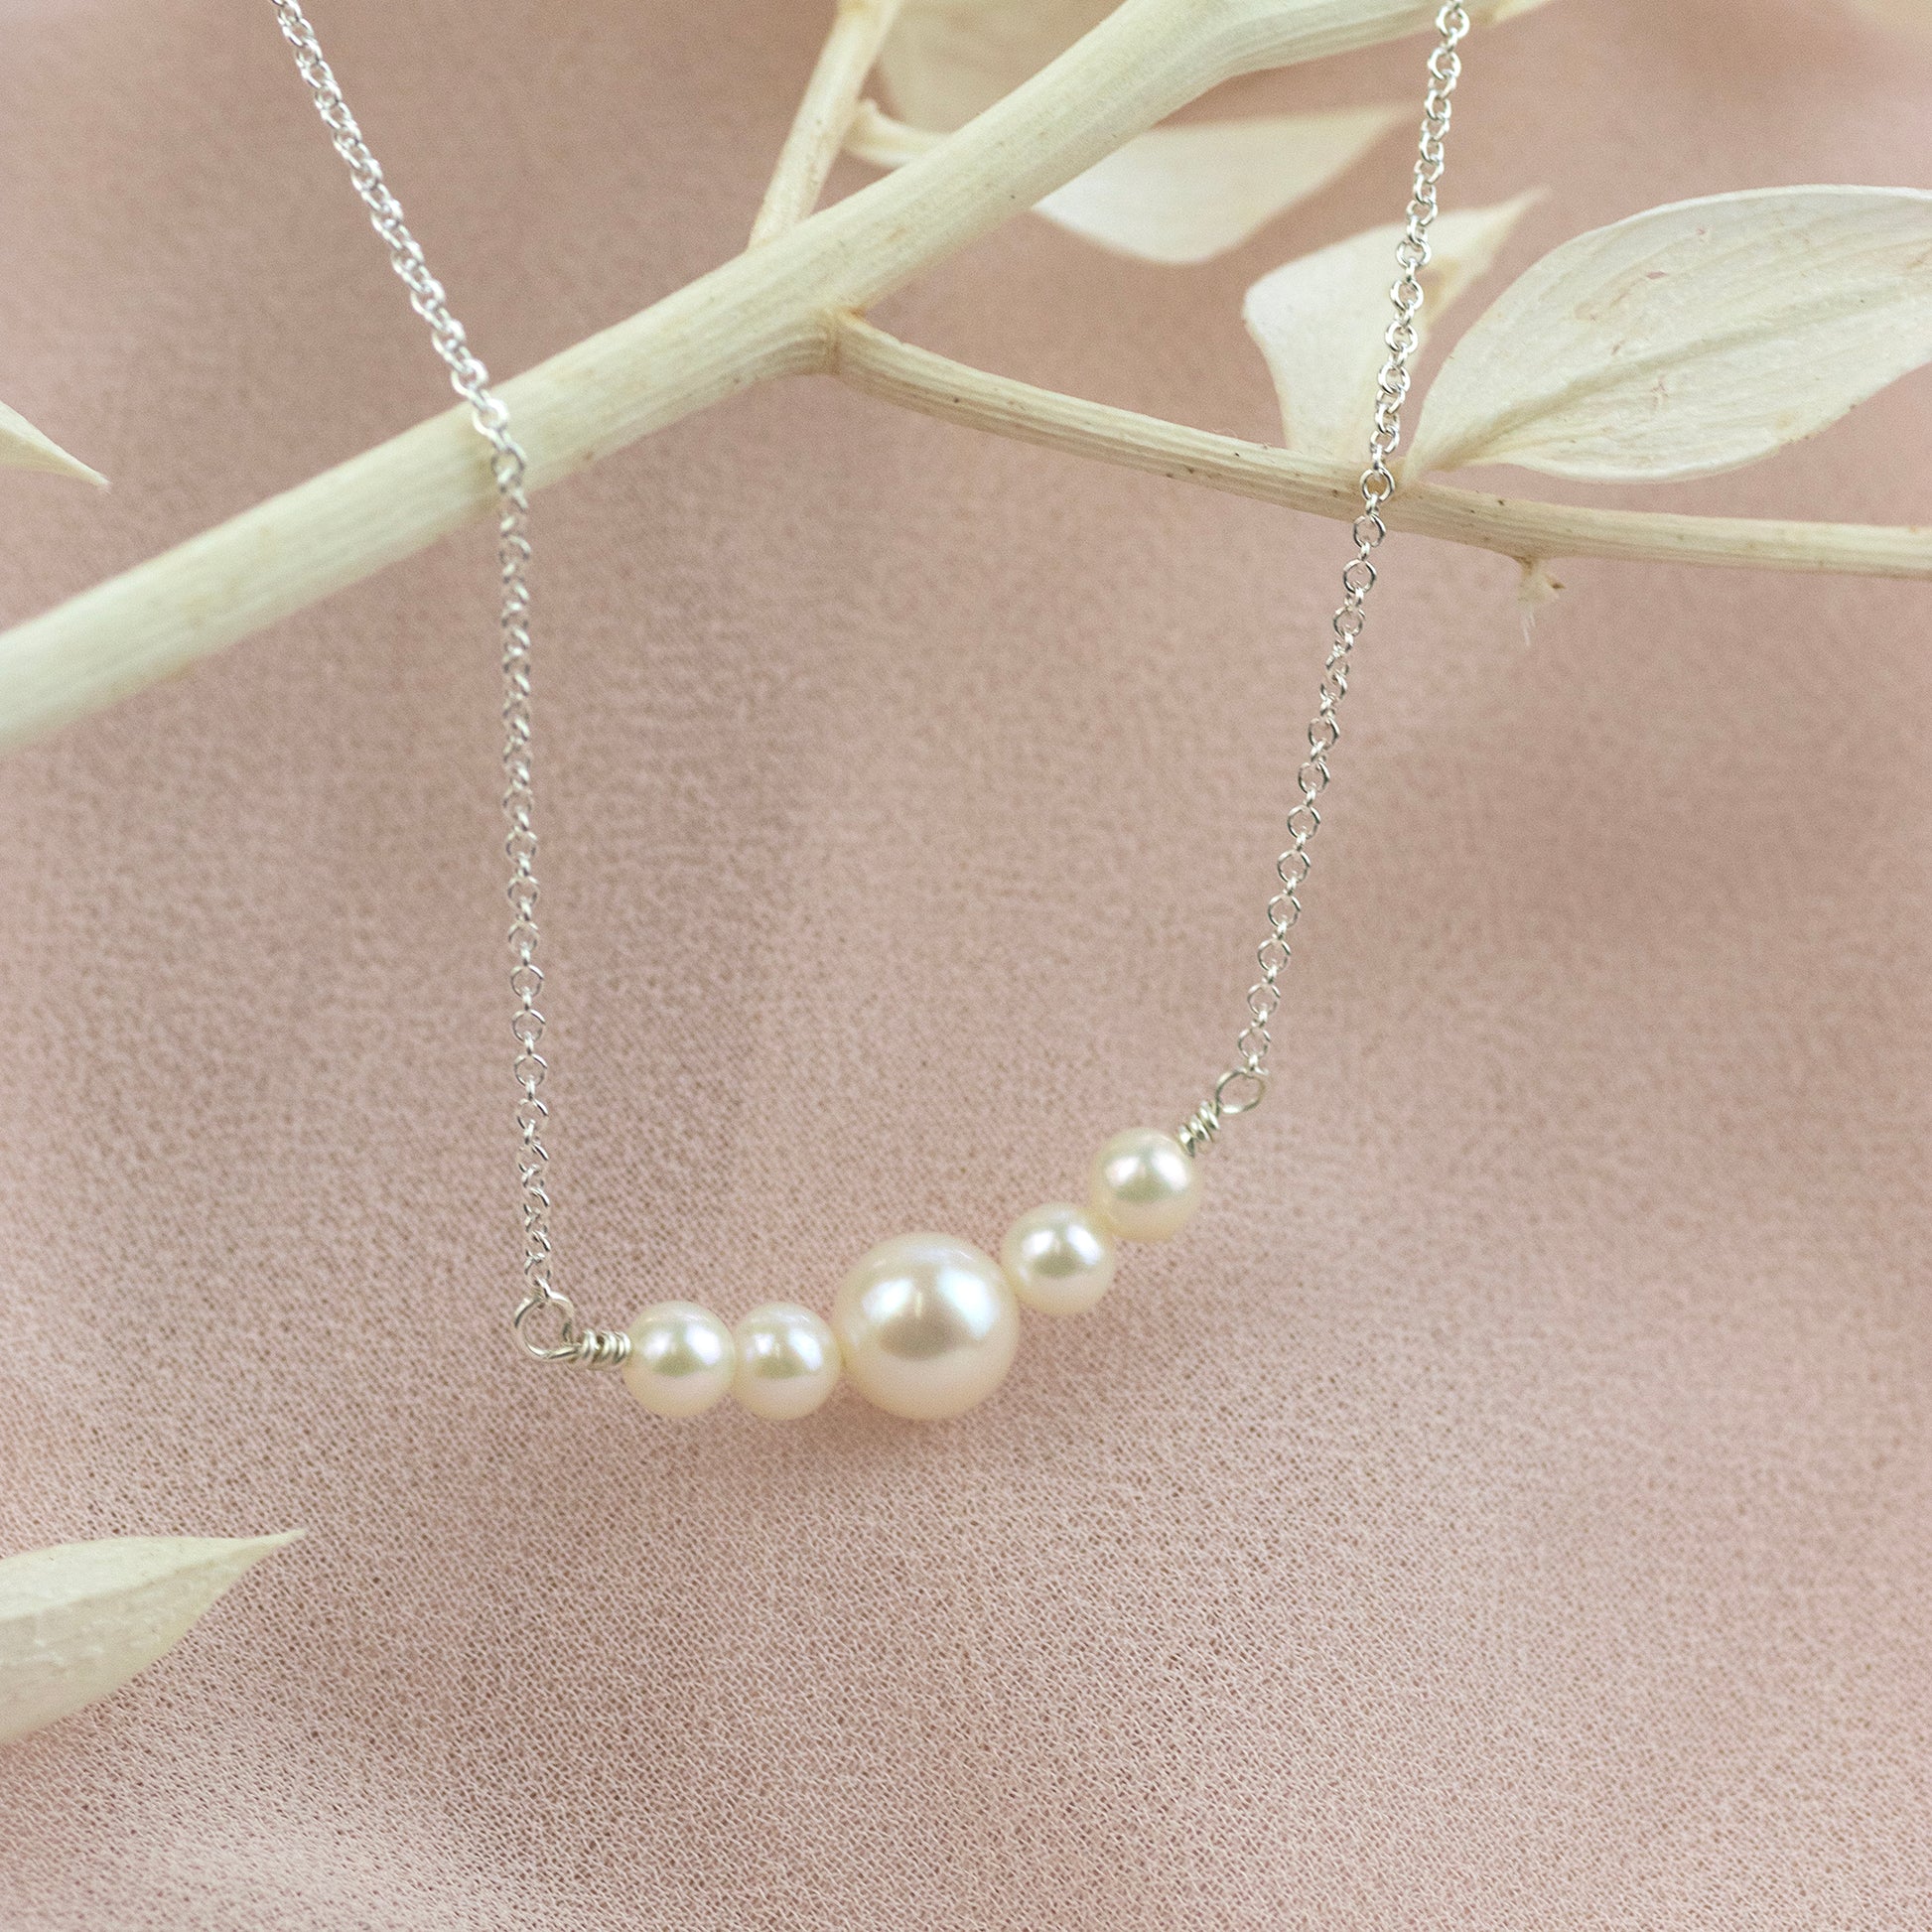 Gift for Mother - 5 Pearls for 5 Loved Ones Necklace - Silver - Gold - Rose Gold